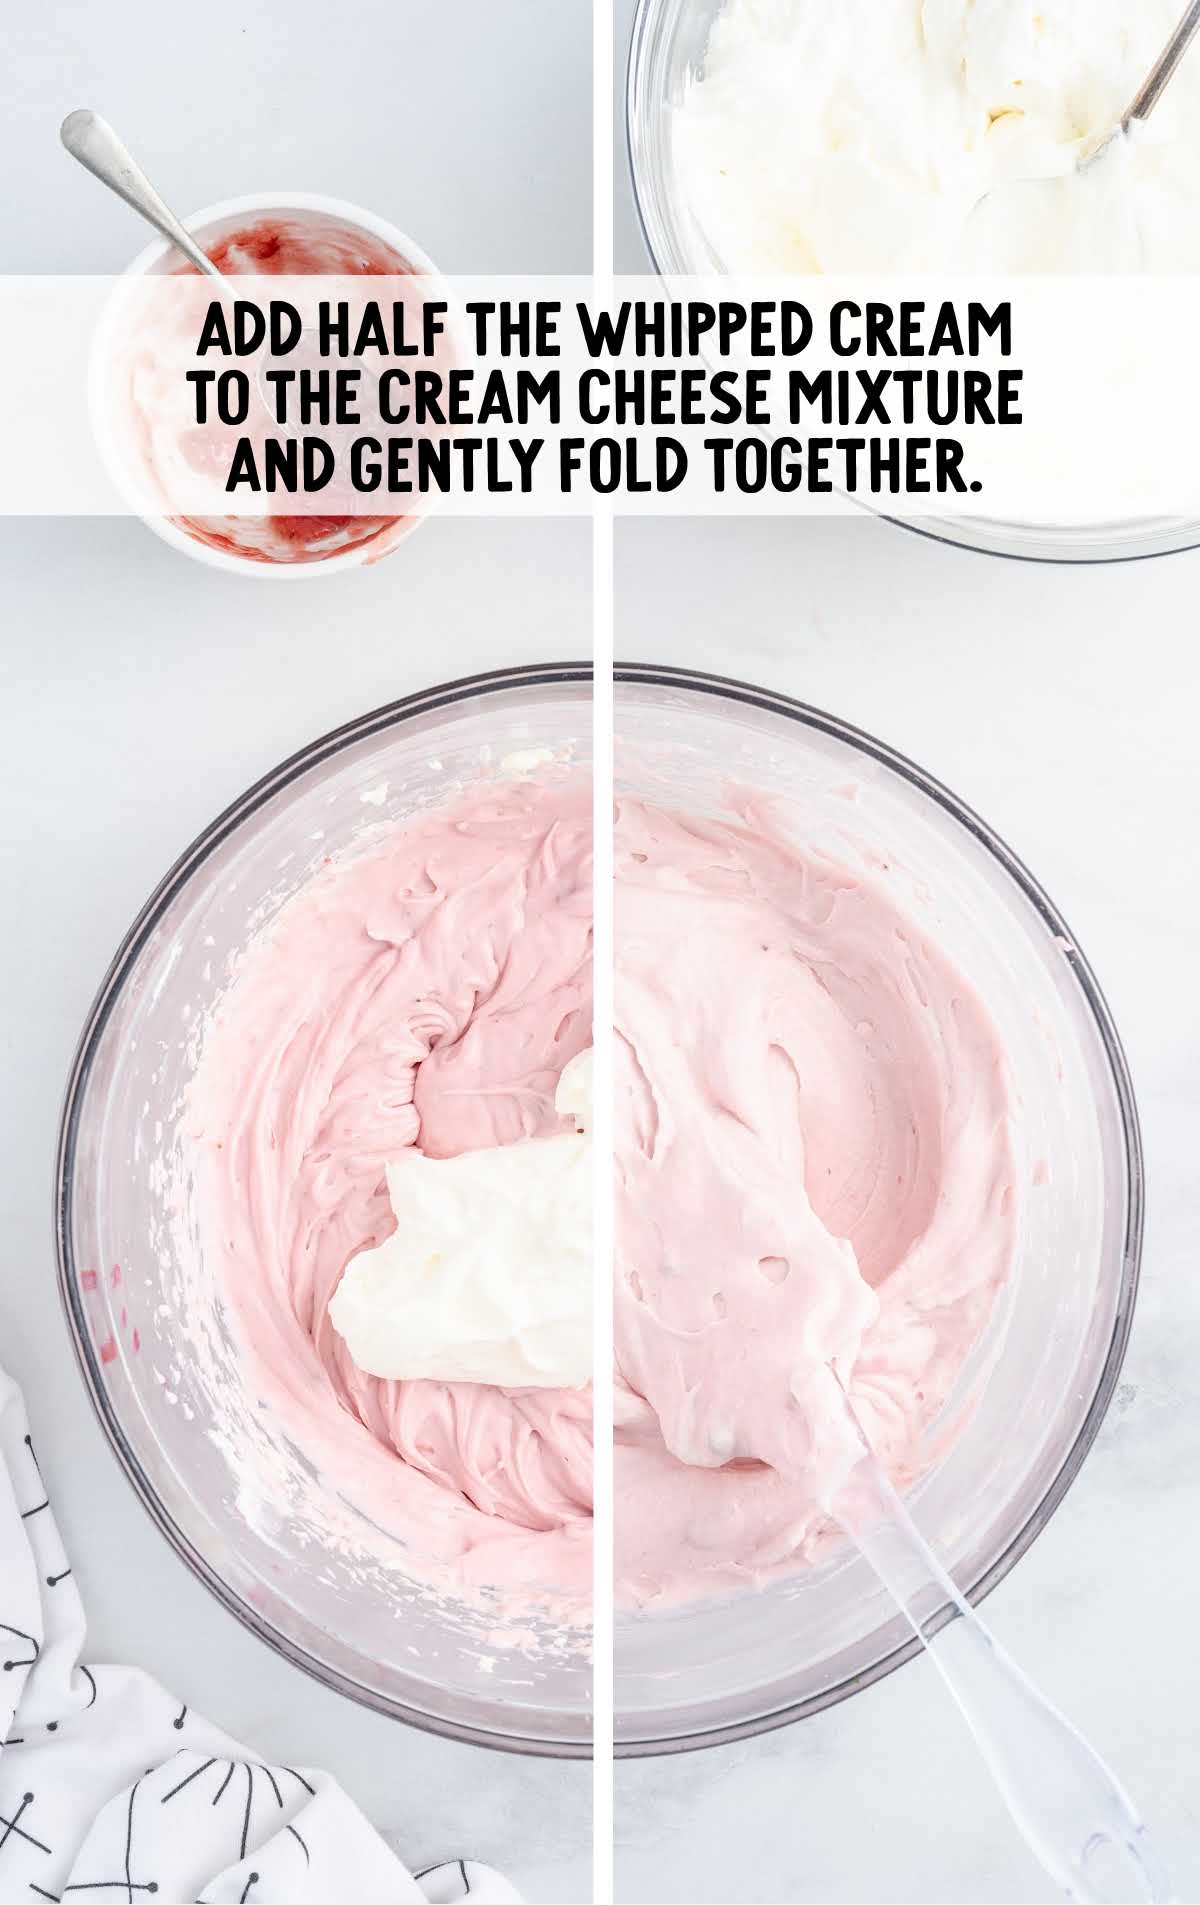 whipped cream added to the cream cheese mixture and folded together in a bowl